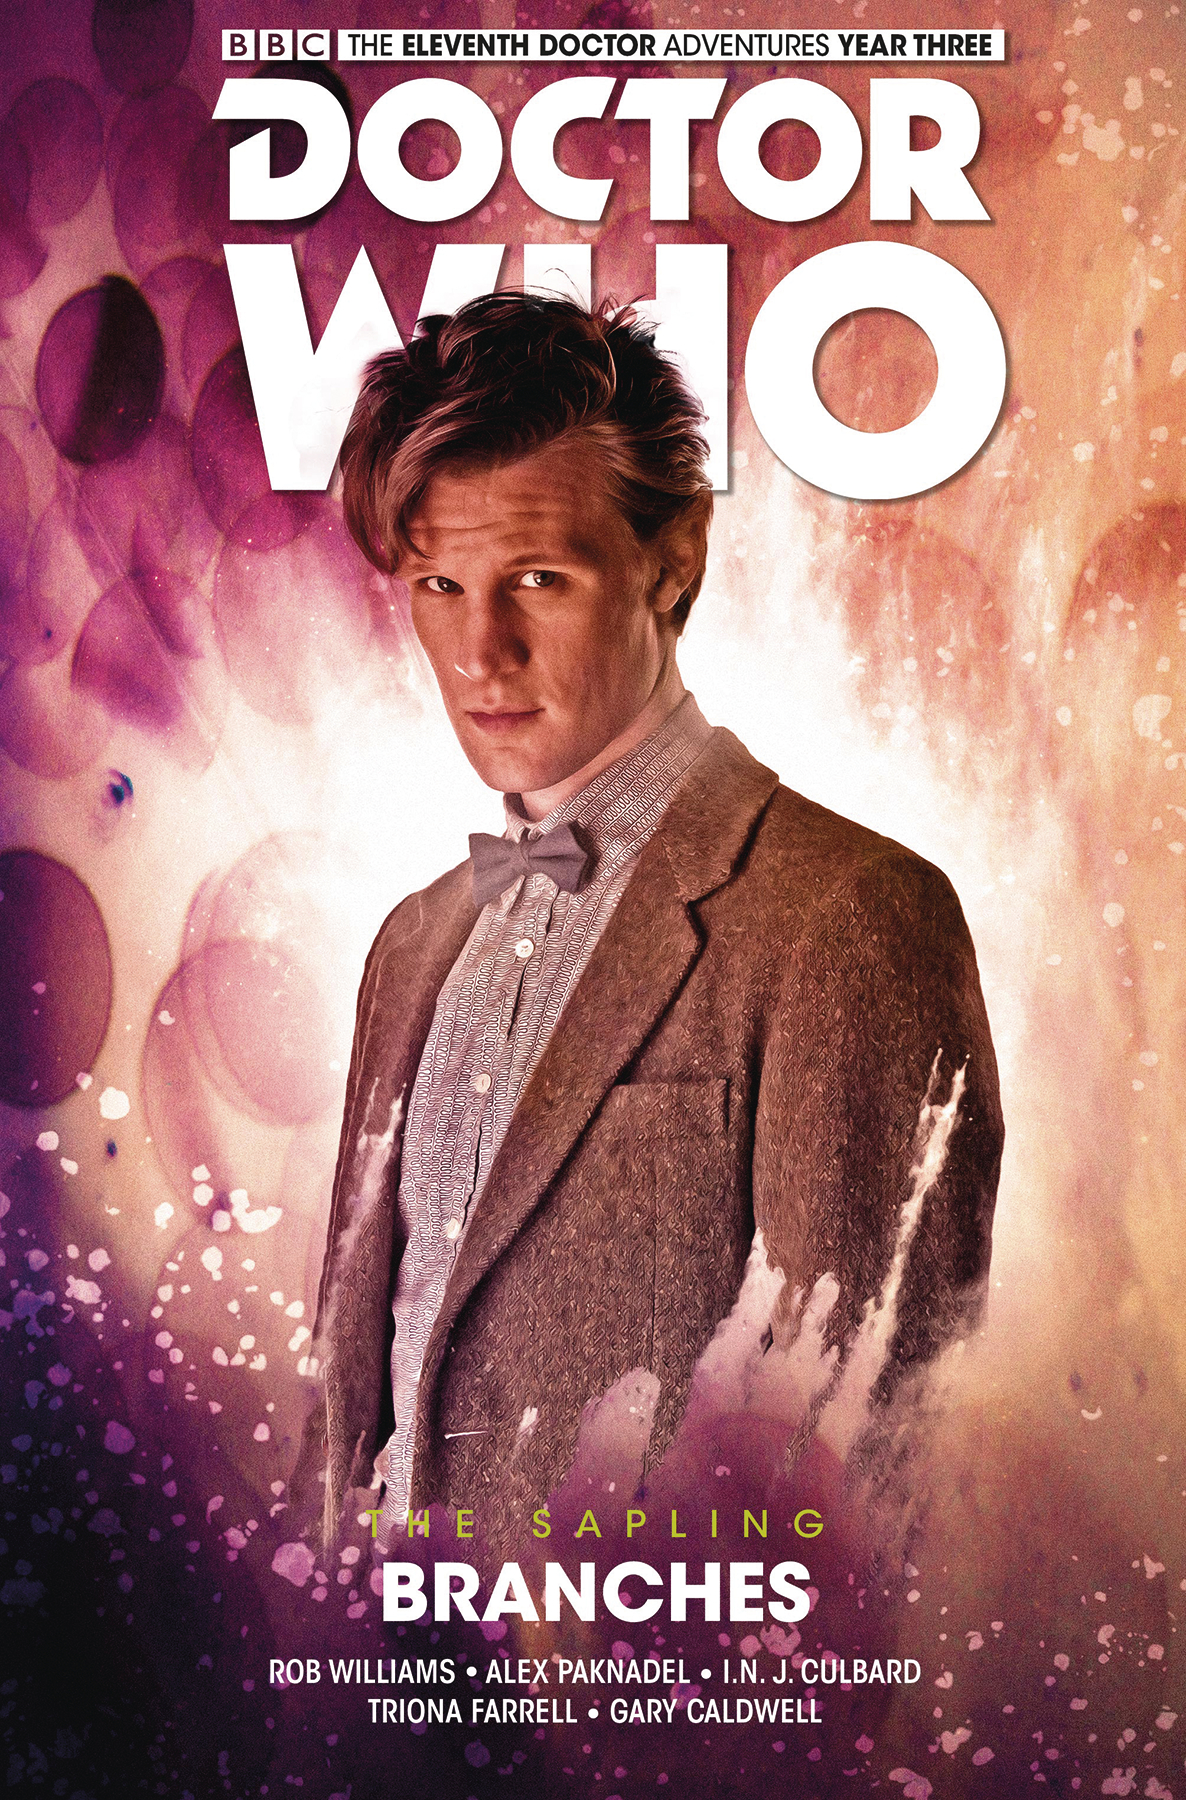 Doctor Who 11th Doctor Sapling Hardcover Graphic Novel Volume 3 Branches